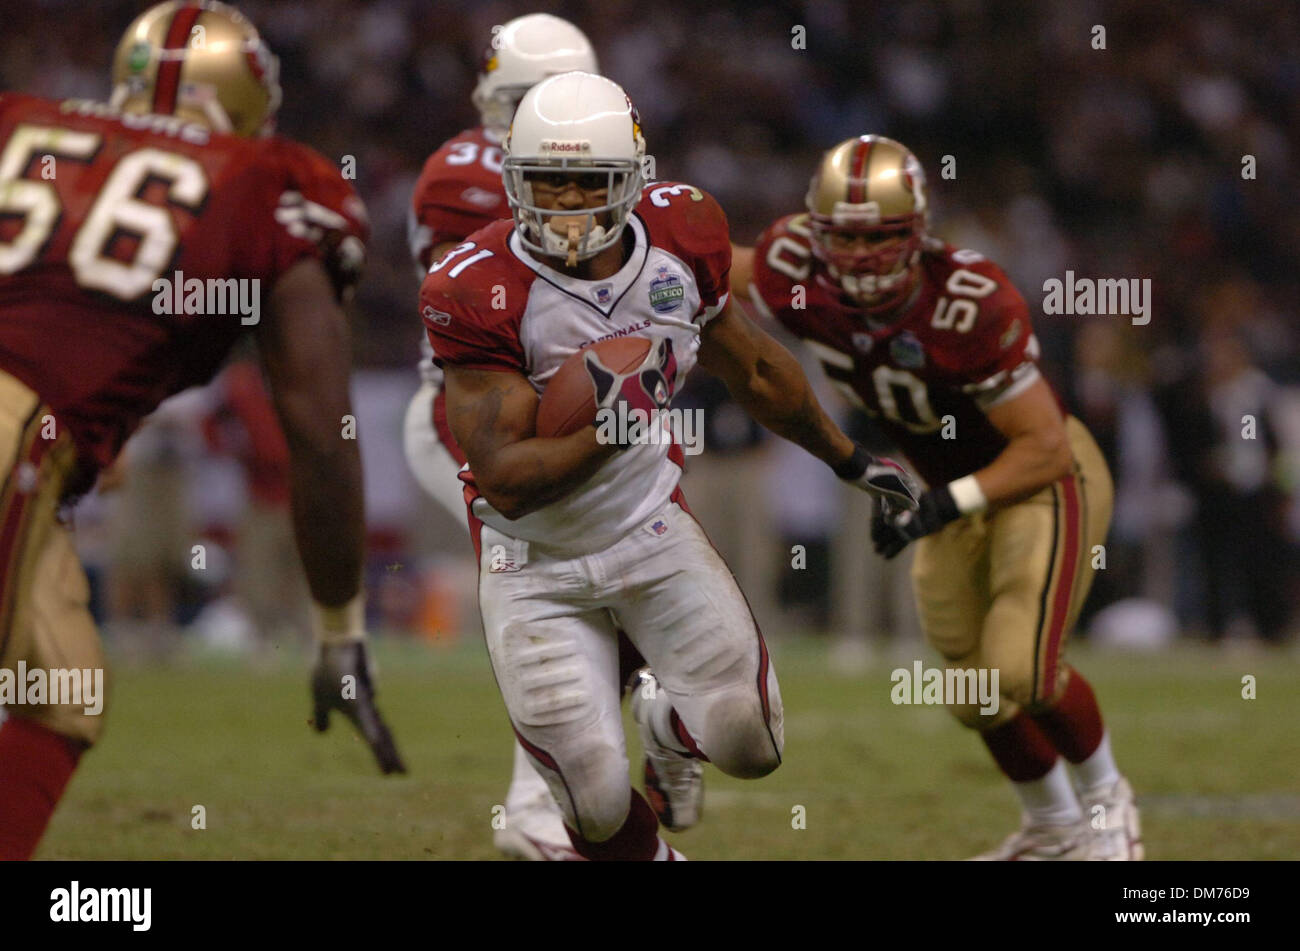 Oct 02, 2005; Mexico City, MEXICO; NFL FOOTBALL: Cardinal running back Marcel Shipp ran for 42 yards on the night, and had five catches for 52 yards in the Sunday evenings Arizona Cardinals 31-14 victory over the 49ers at Estadio Azteca in Mexico City. Mandatory Credit: Photo by Jose Luis Villegas/Sacramento Bee/ZUMA Press. (©) Copyright 2005 by Jose Luis Villegas/Sacramento Bee Stock Photo